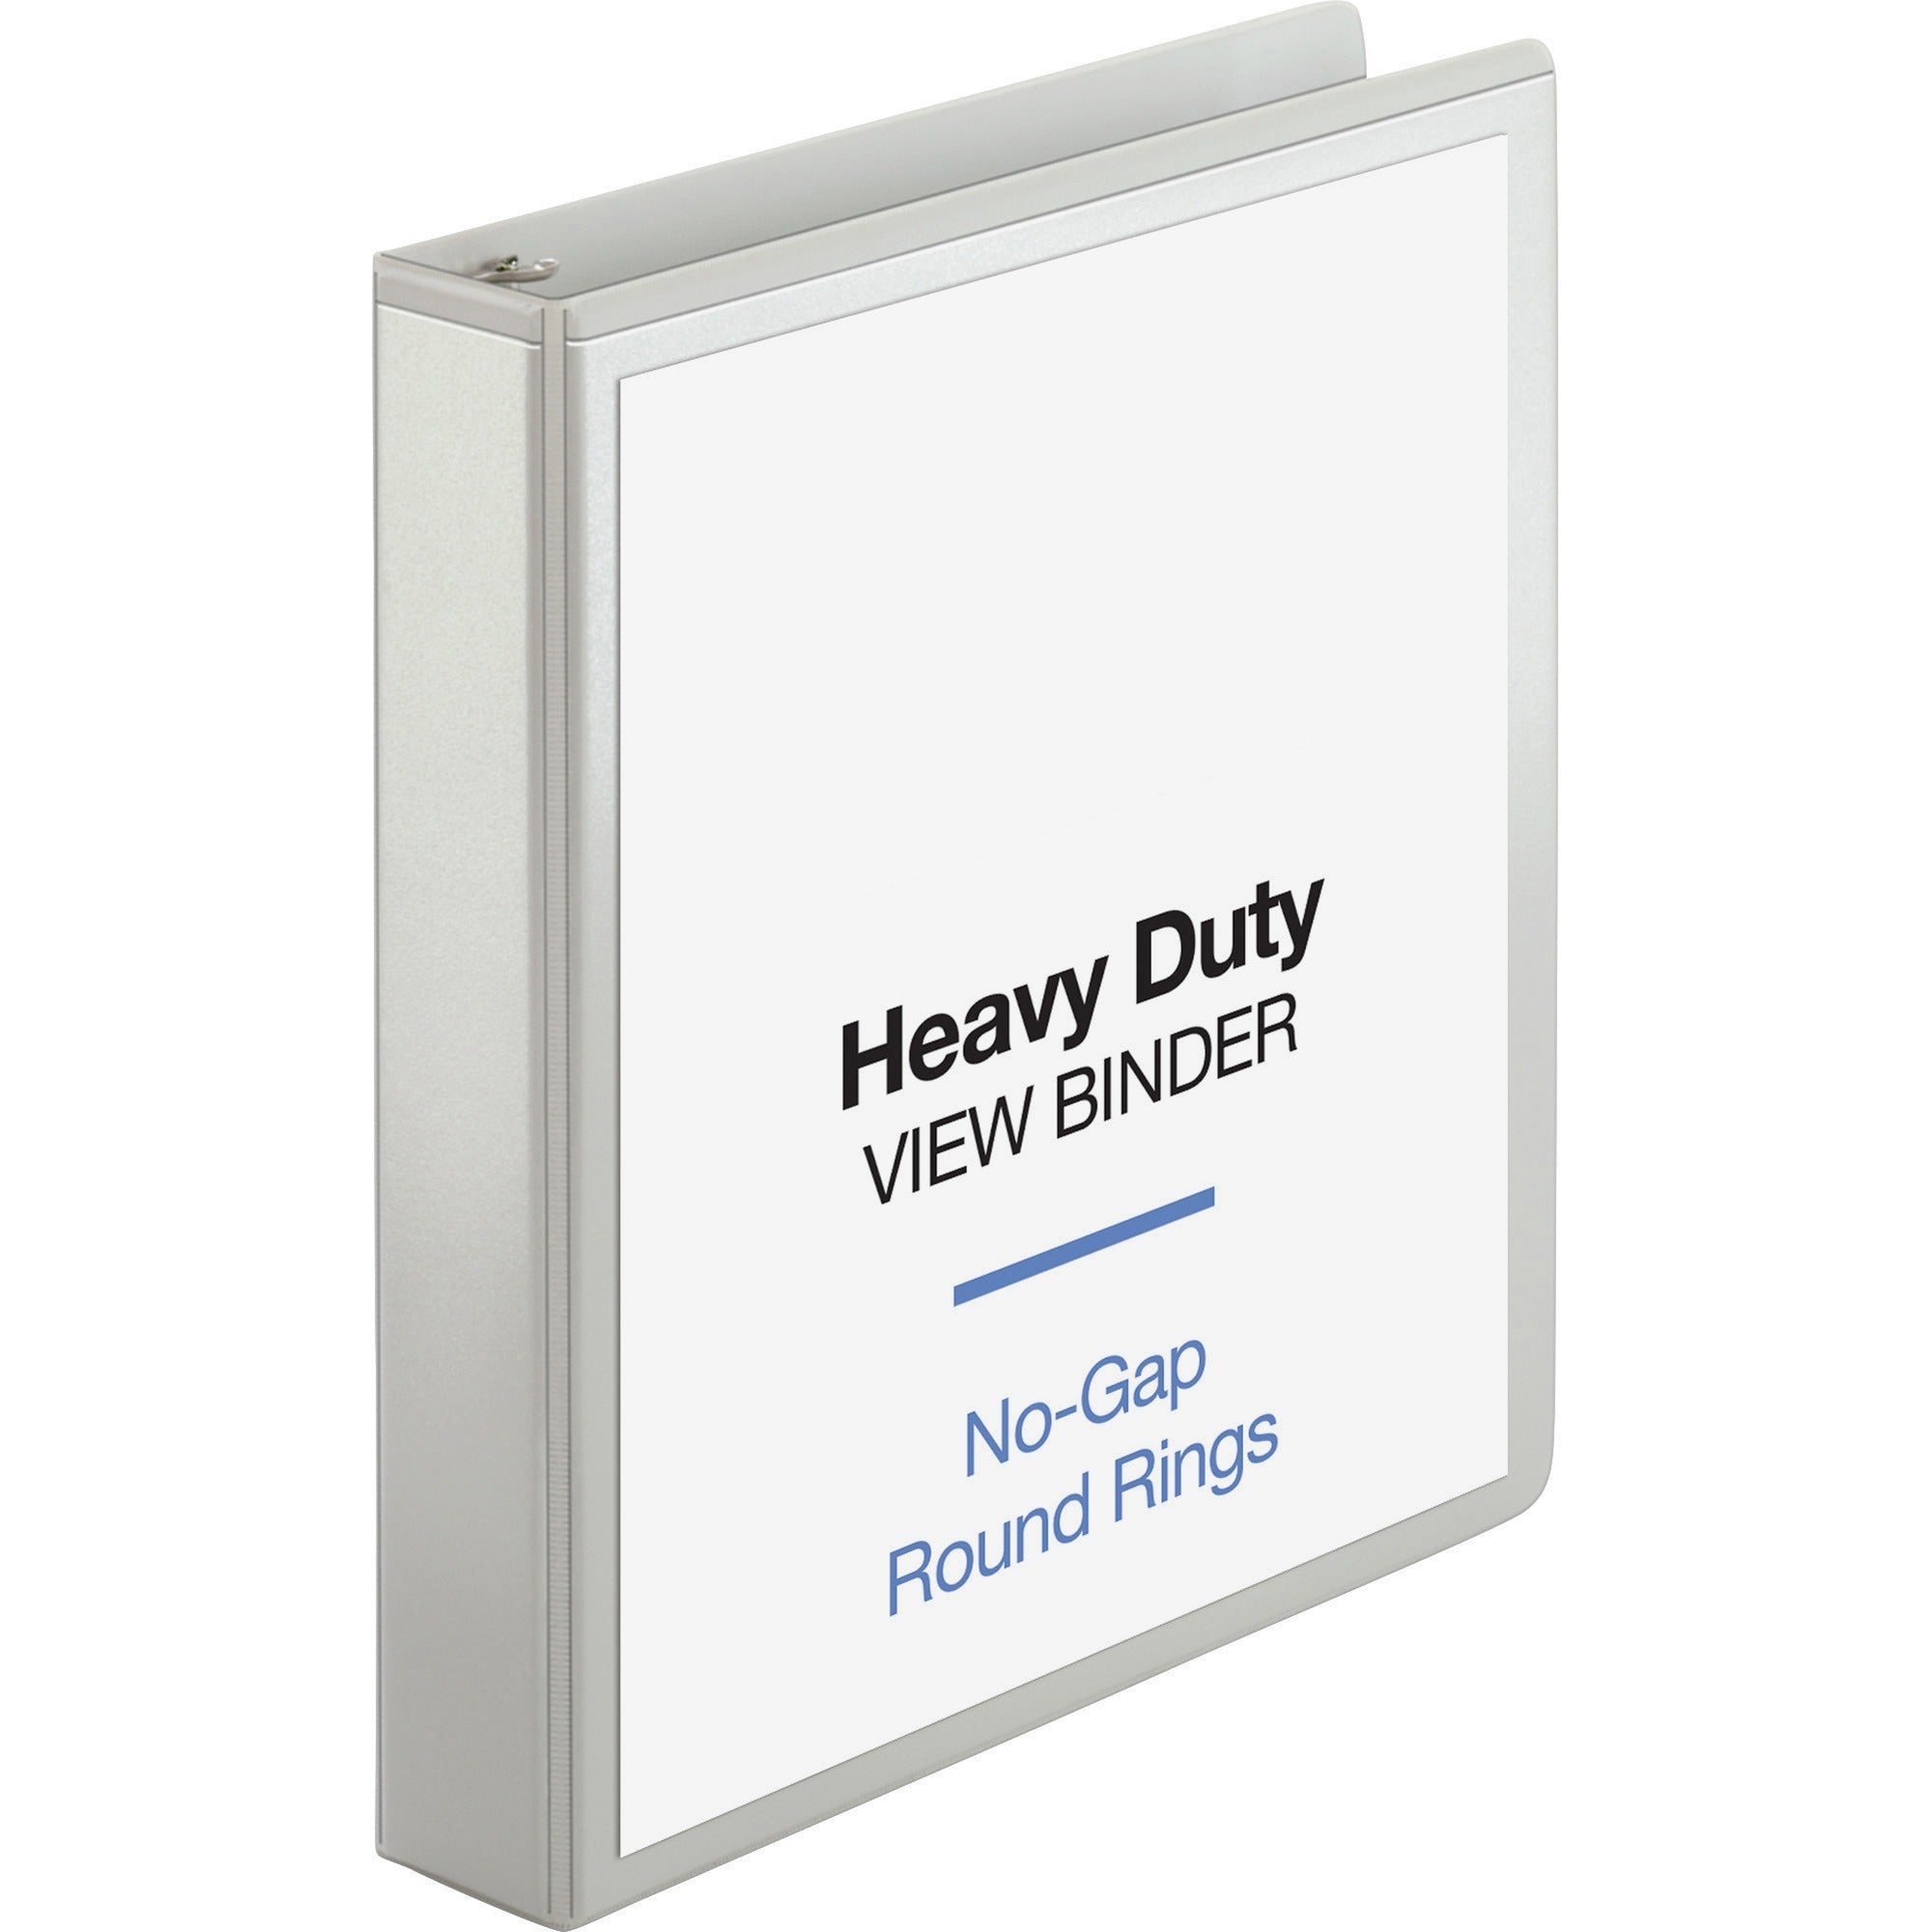 business-source-round-ring-view-binder-1-1-2-binder-capacity-letter-8-1-2-x-11-sheet-size-350-sheet-capacity-round-ring-fasteners-2-internal-pockets-polypropylene-chipboard-board-white-wrinkle-free-non-glare-transfer-safe_bsn19651 - 1